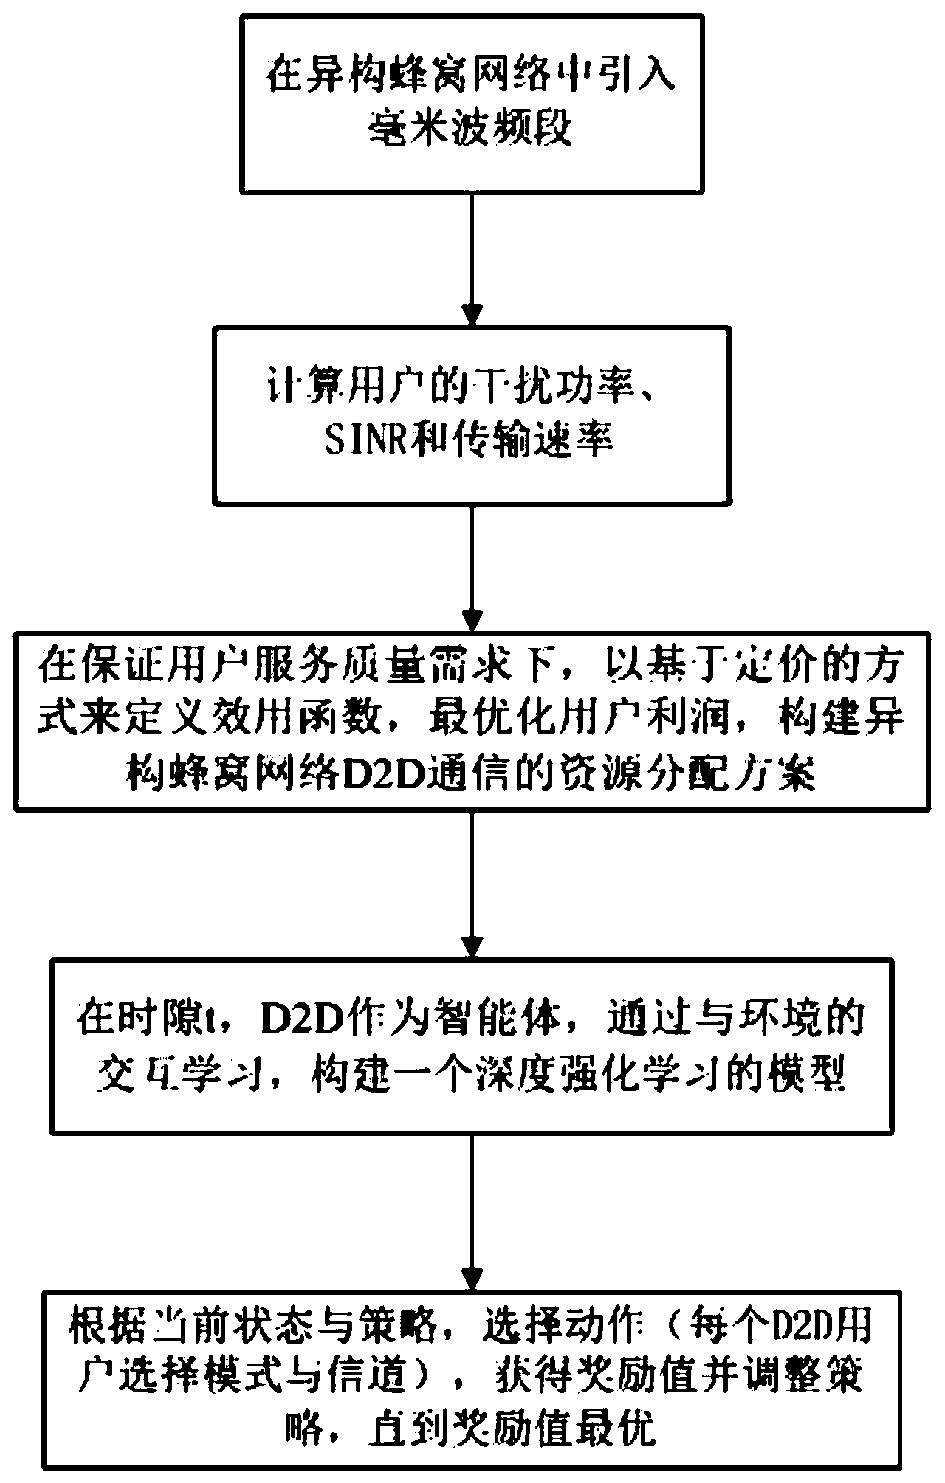 Heterogeneous cellular network D2D communication resource allocation method and system